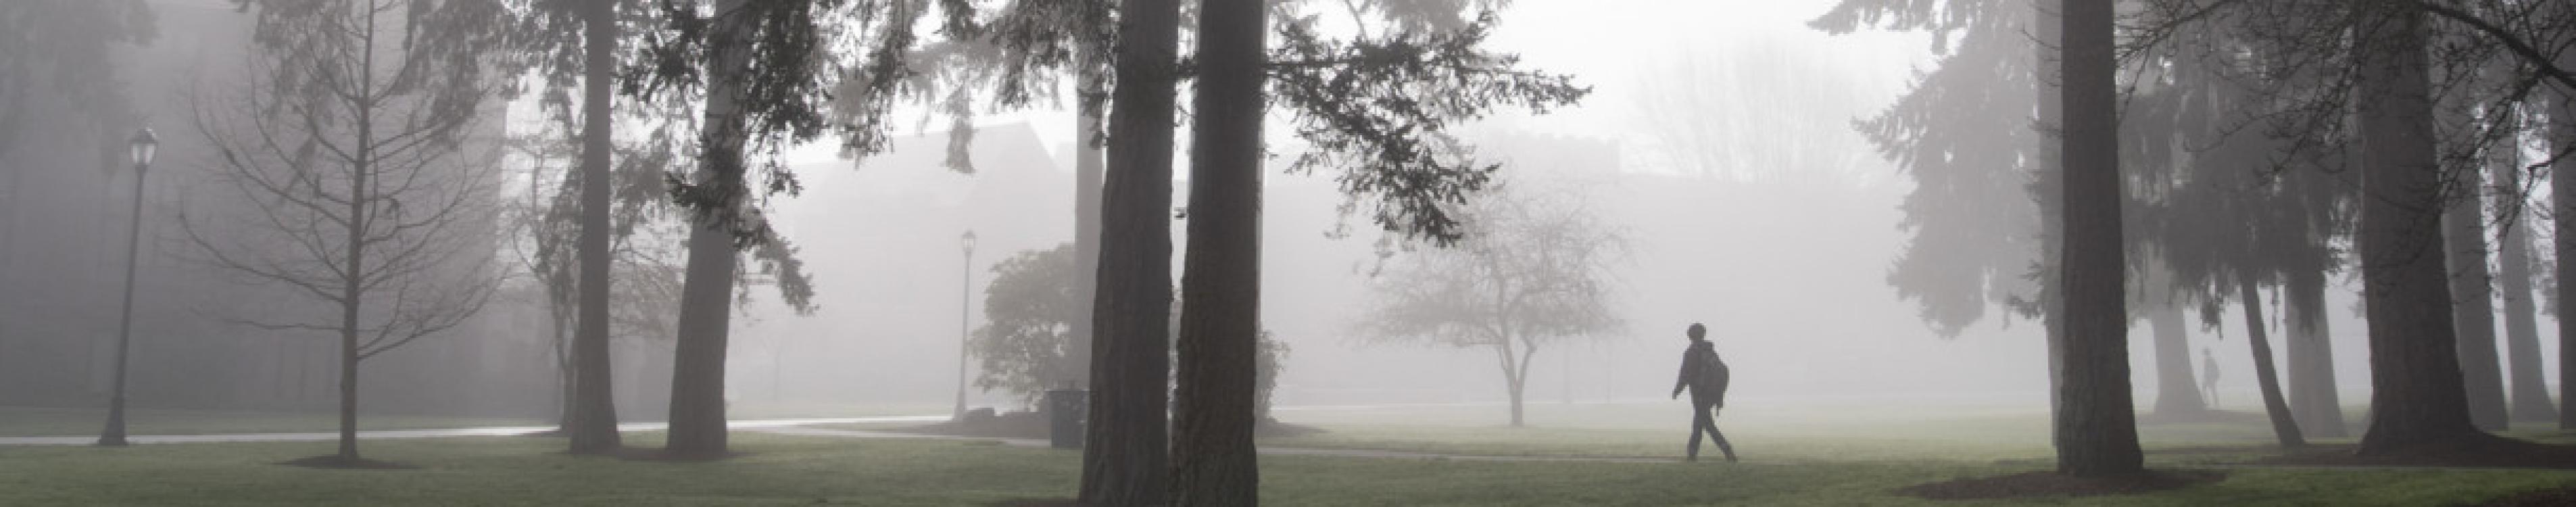 Person walking along a path on a foggy day